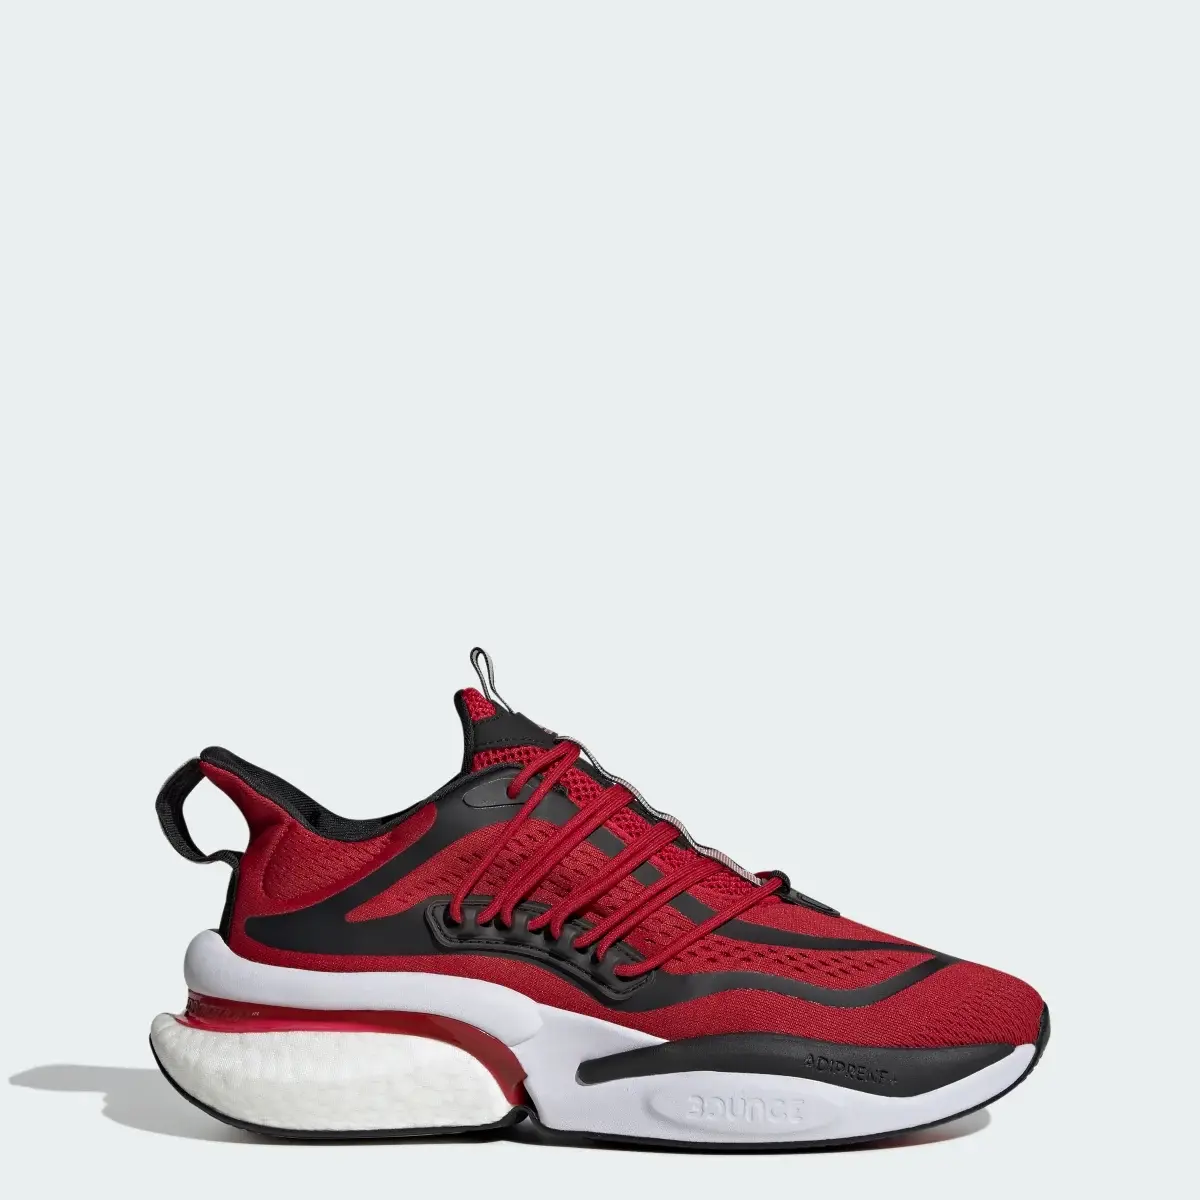 Adidas Louisville Alphaboost V1 Shoes. 1